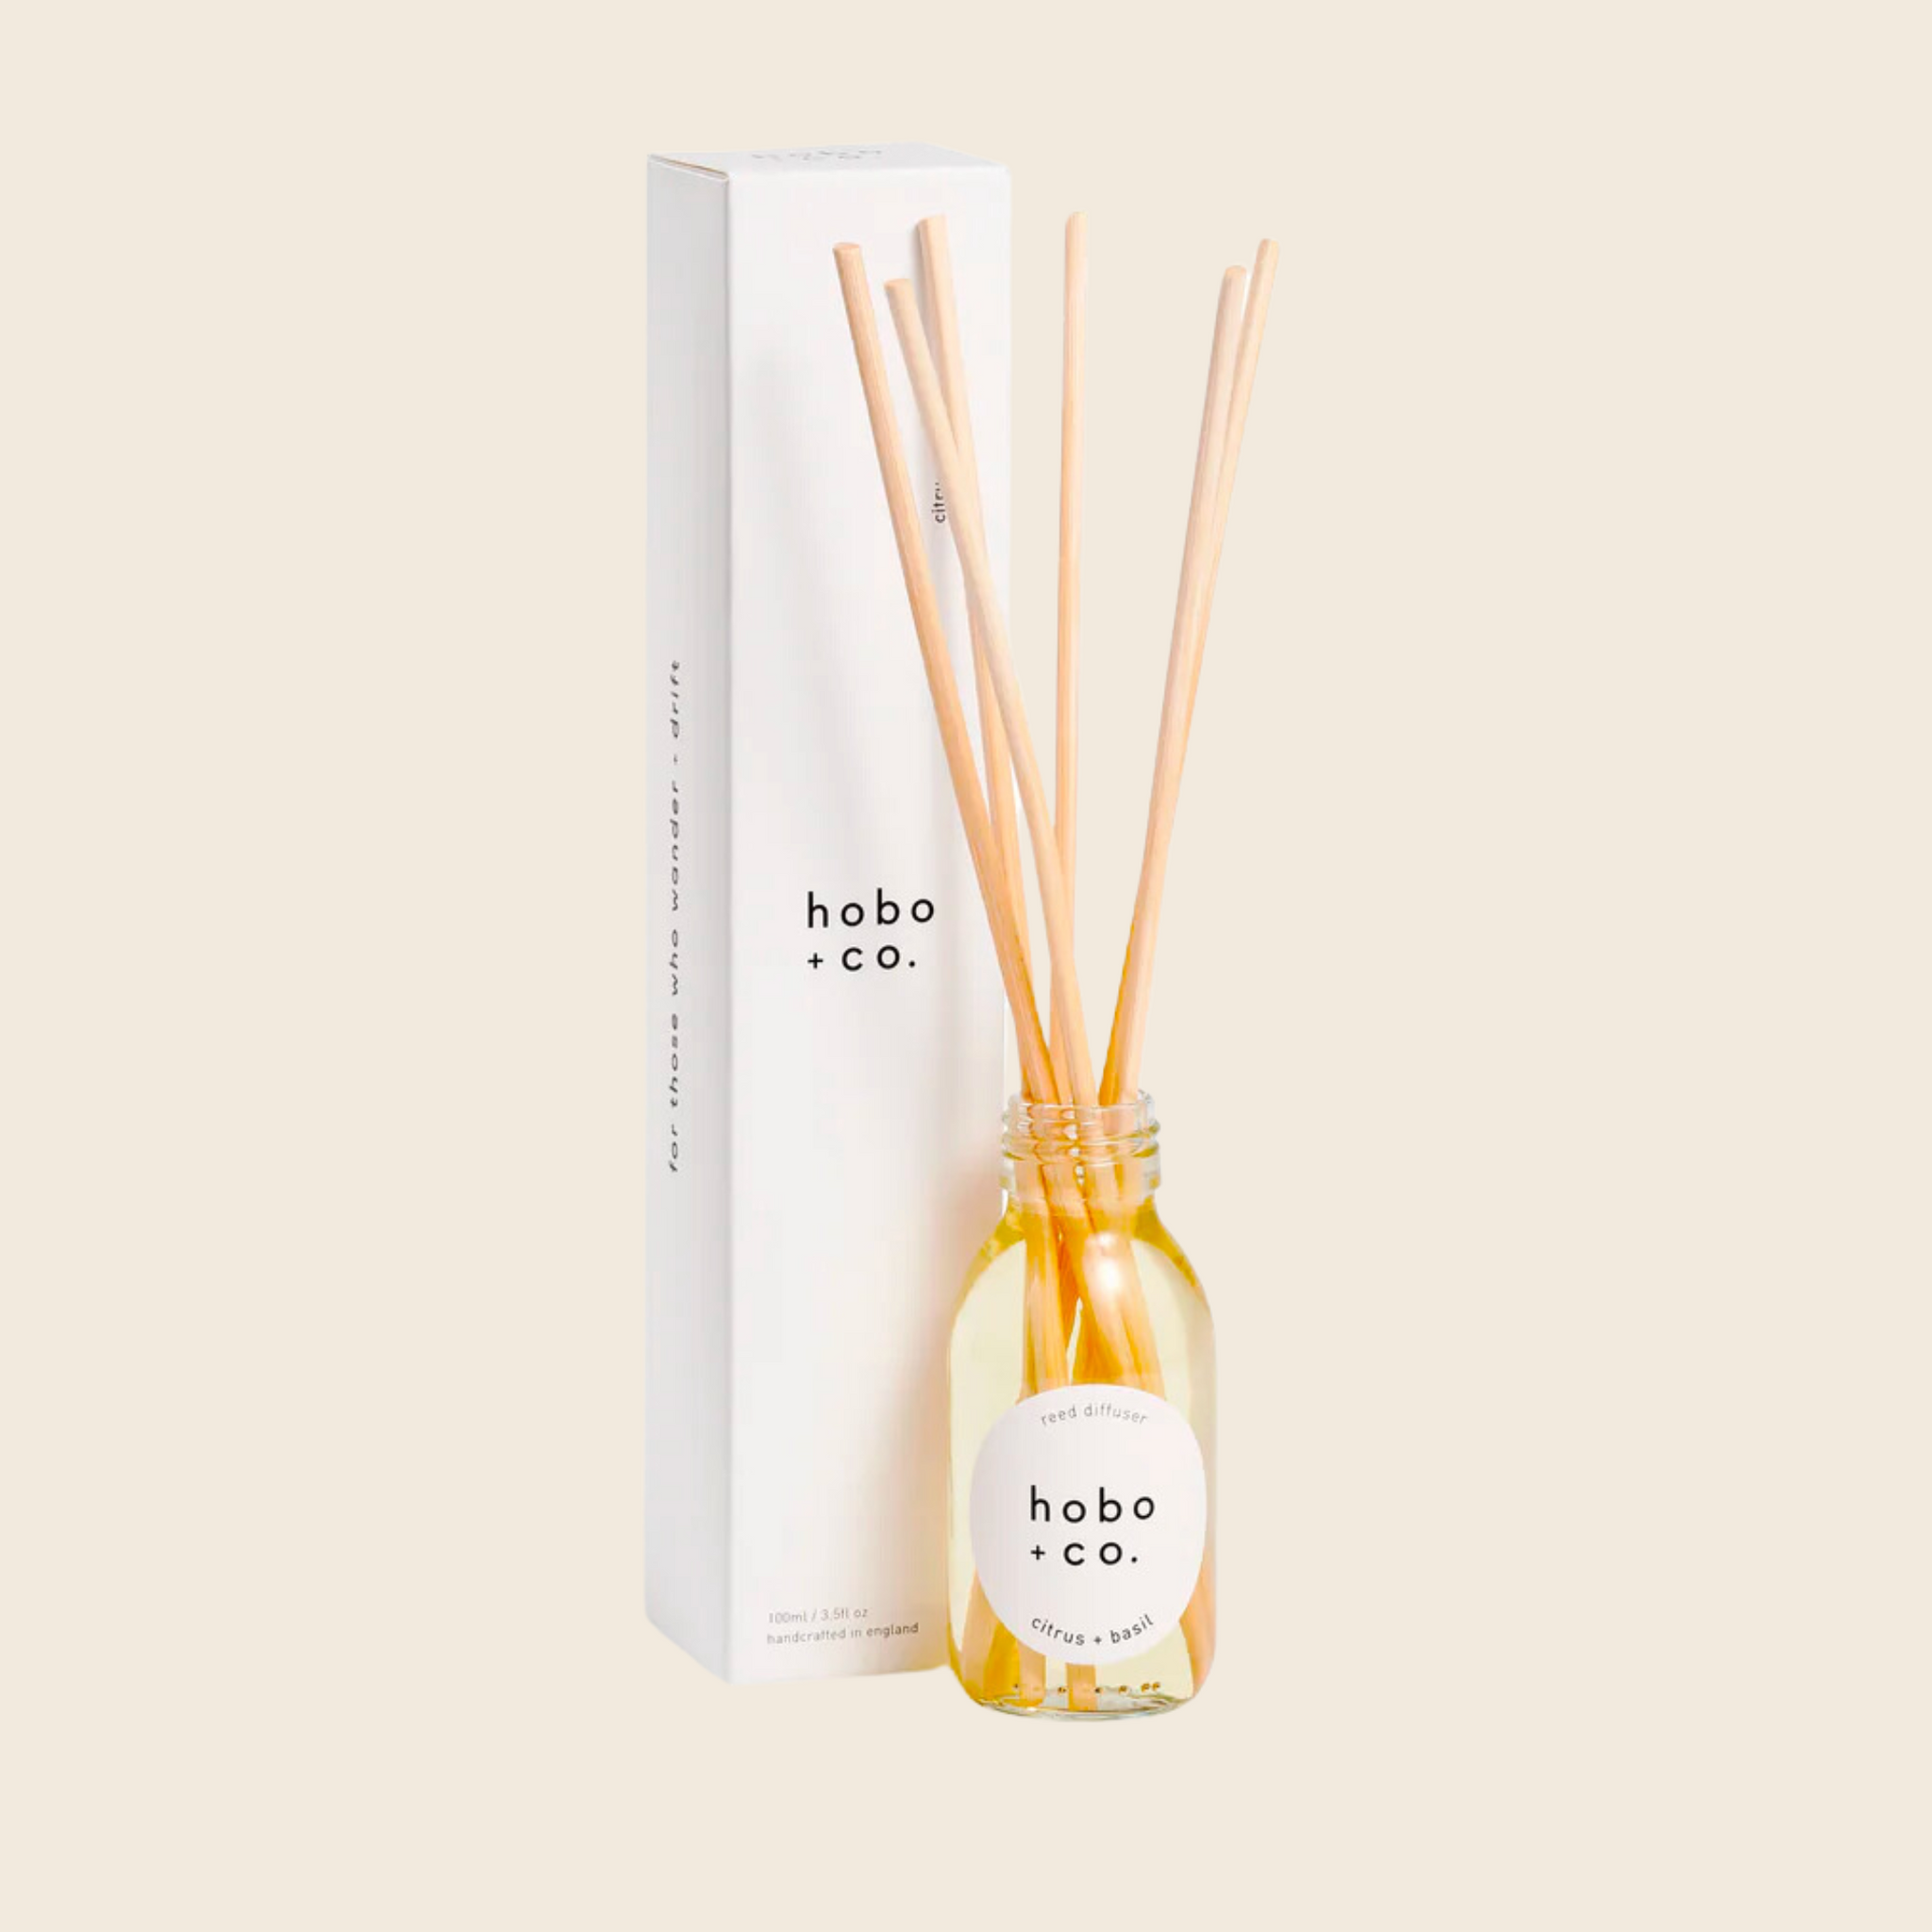 Hobo and Co Citrus and Basil Reed Diffuser